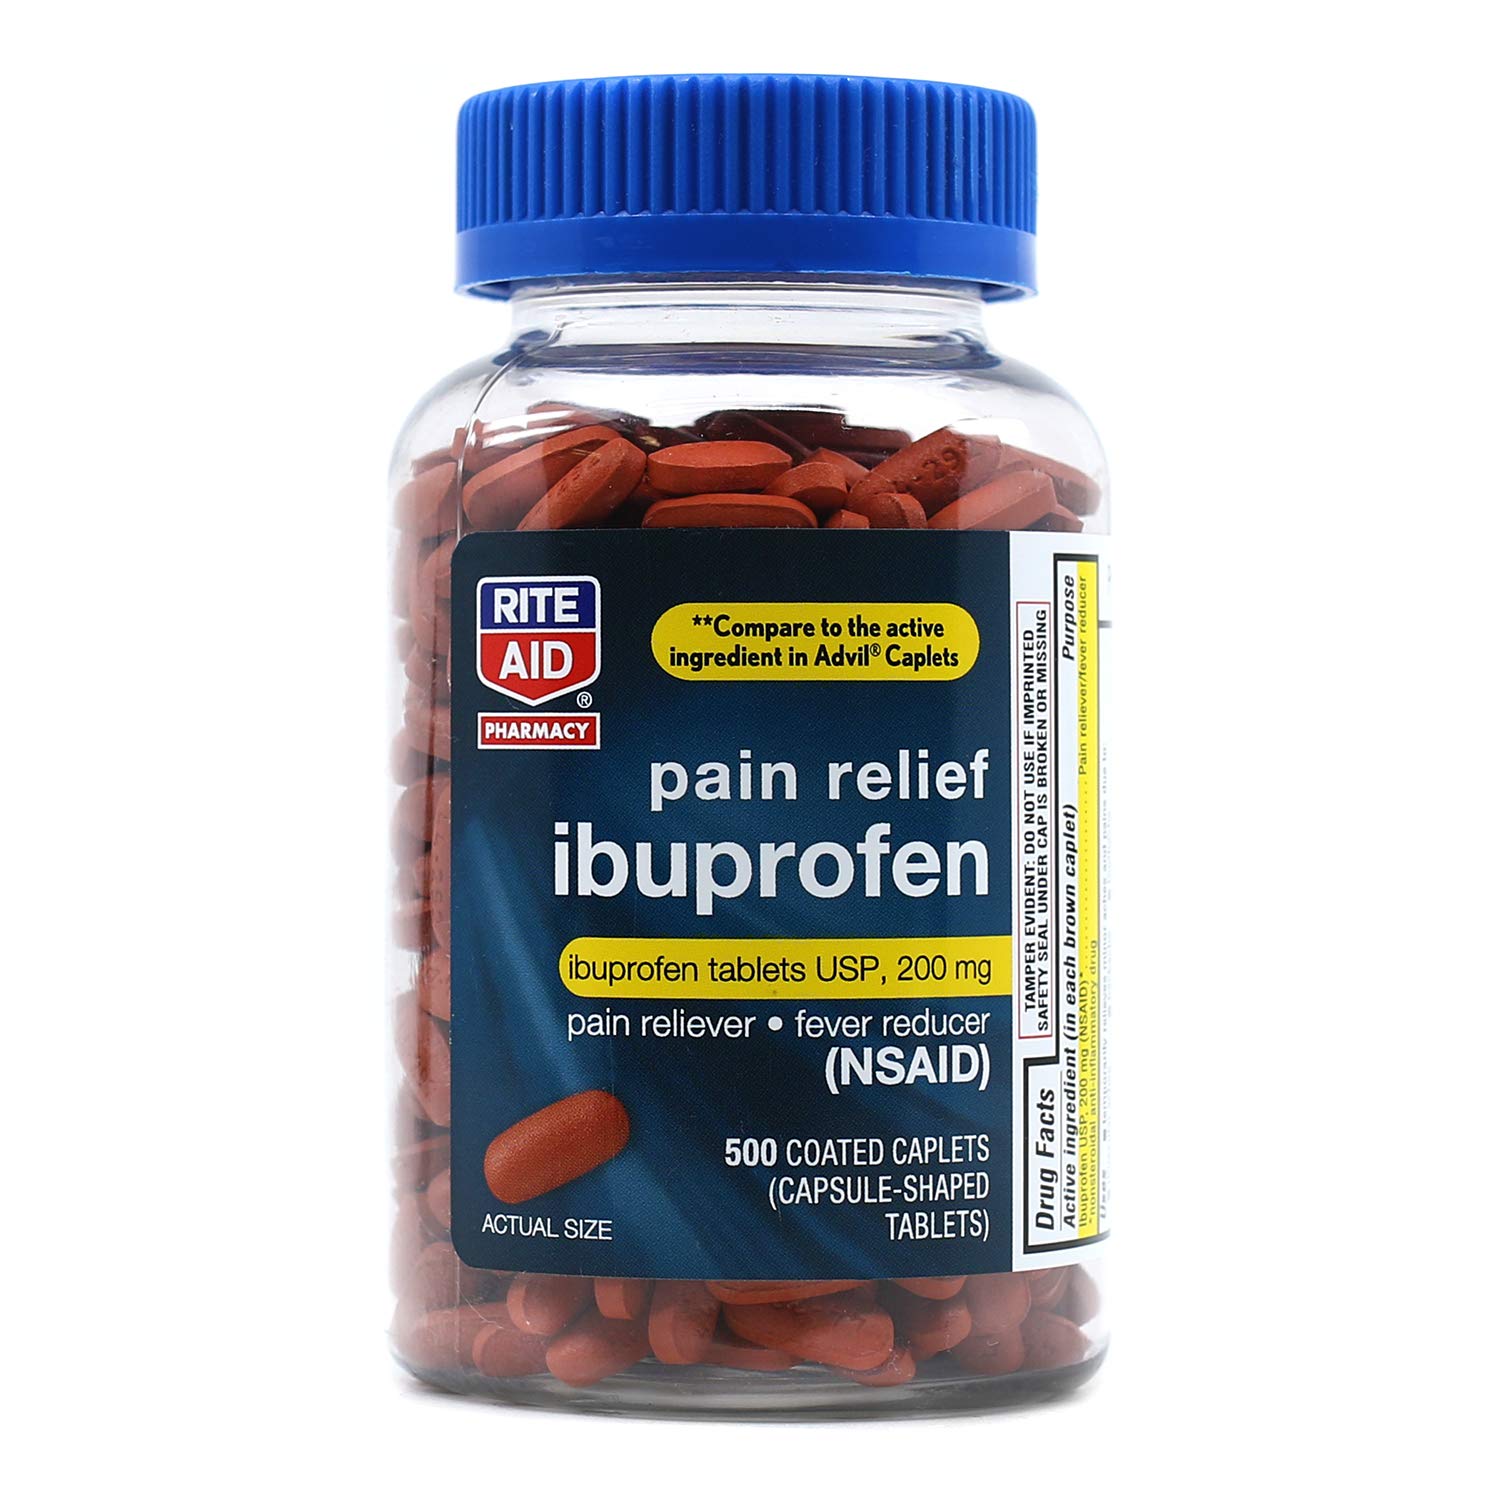 Rite Aid Pharmacy Ibuprofen 200 mg - 500 Coated Brown Caplets - Pain Reliever and Fever Reducer - Migraine Relief - Back Pain Relief - Arthritis Pain Relief Pills - Pain Killer